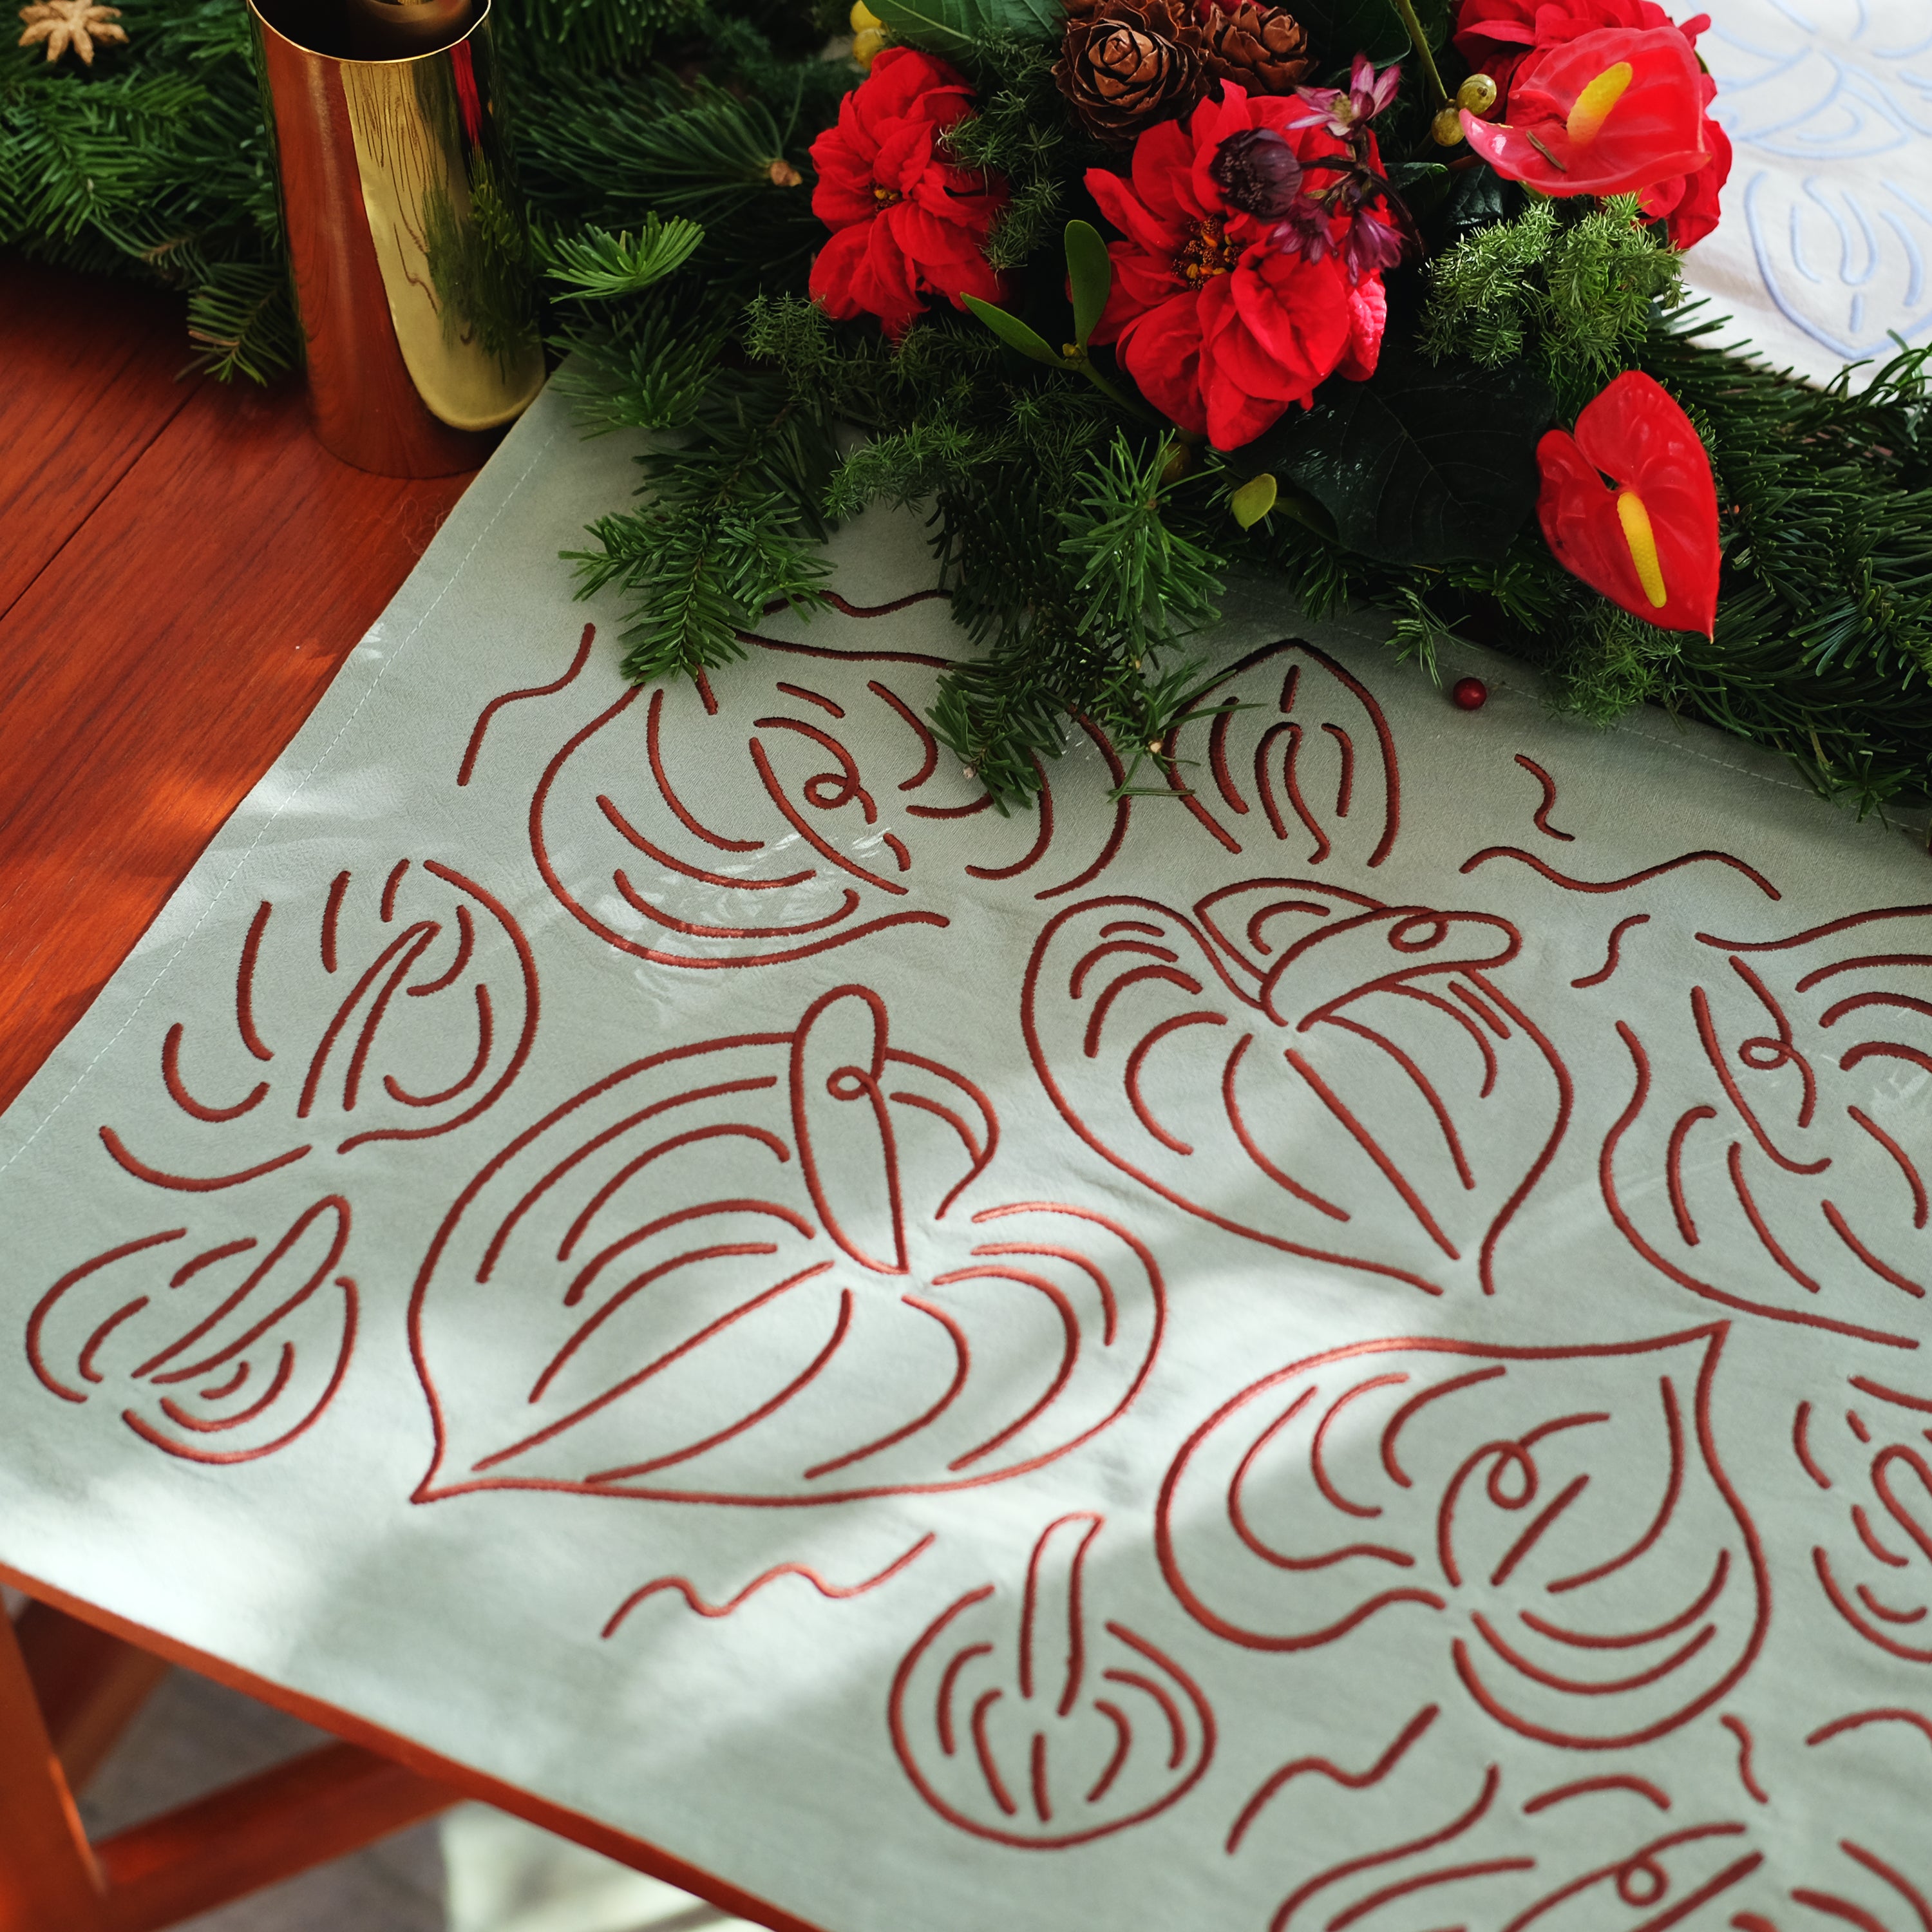 Embroidered Cotton Placemats with Anthurium motifs - Set of 3